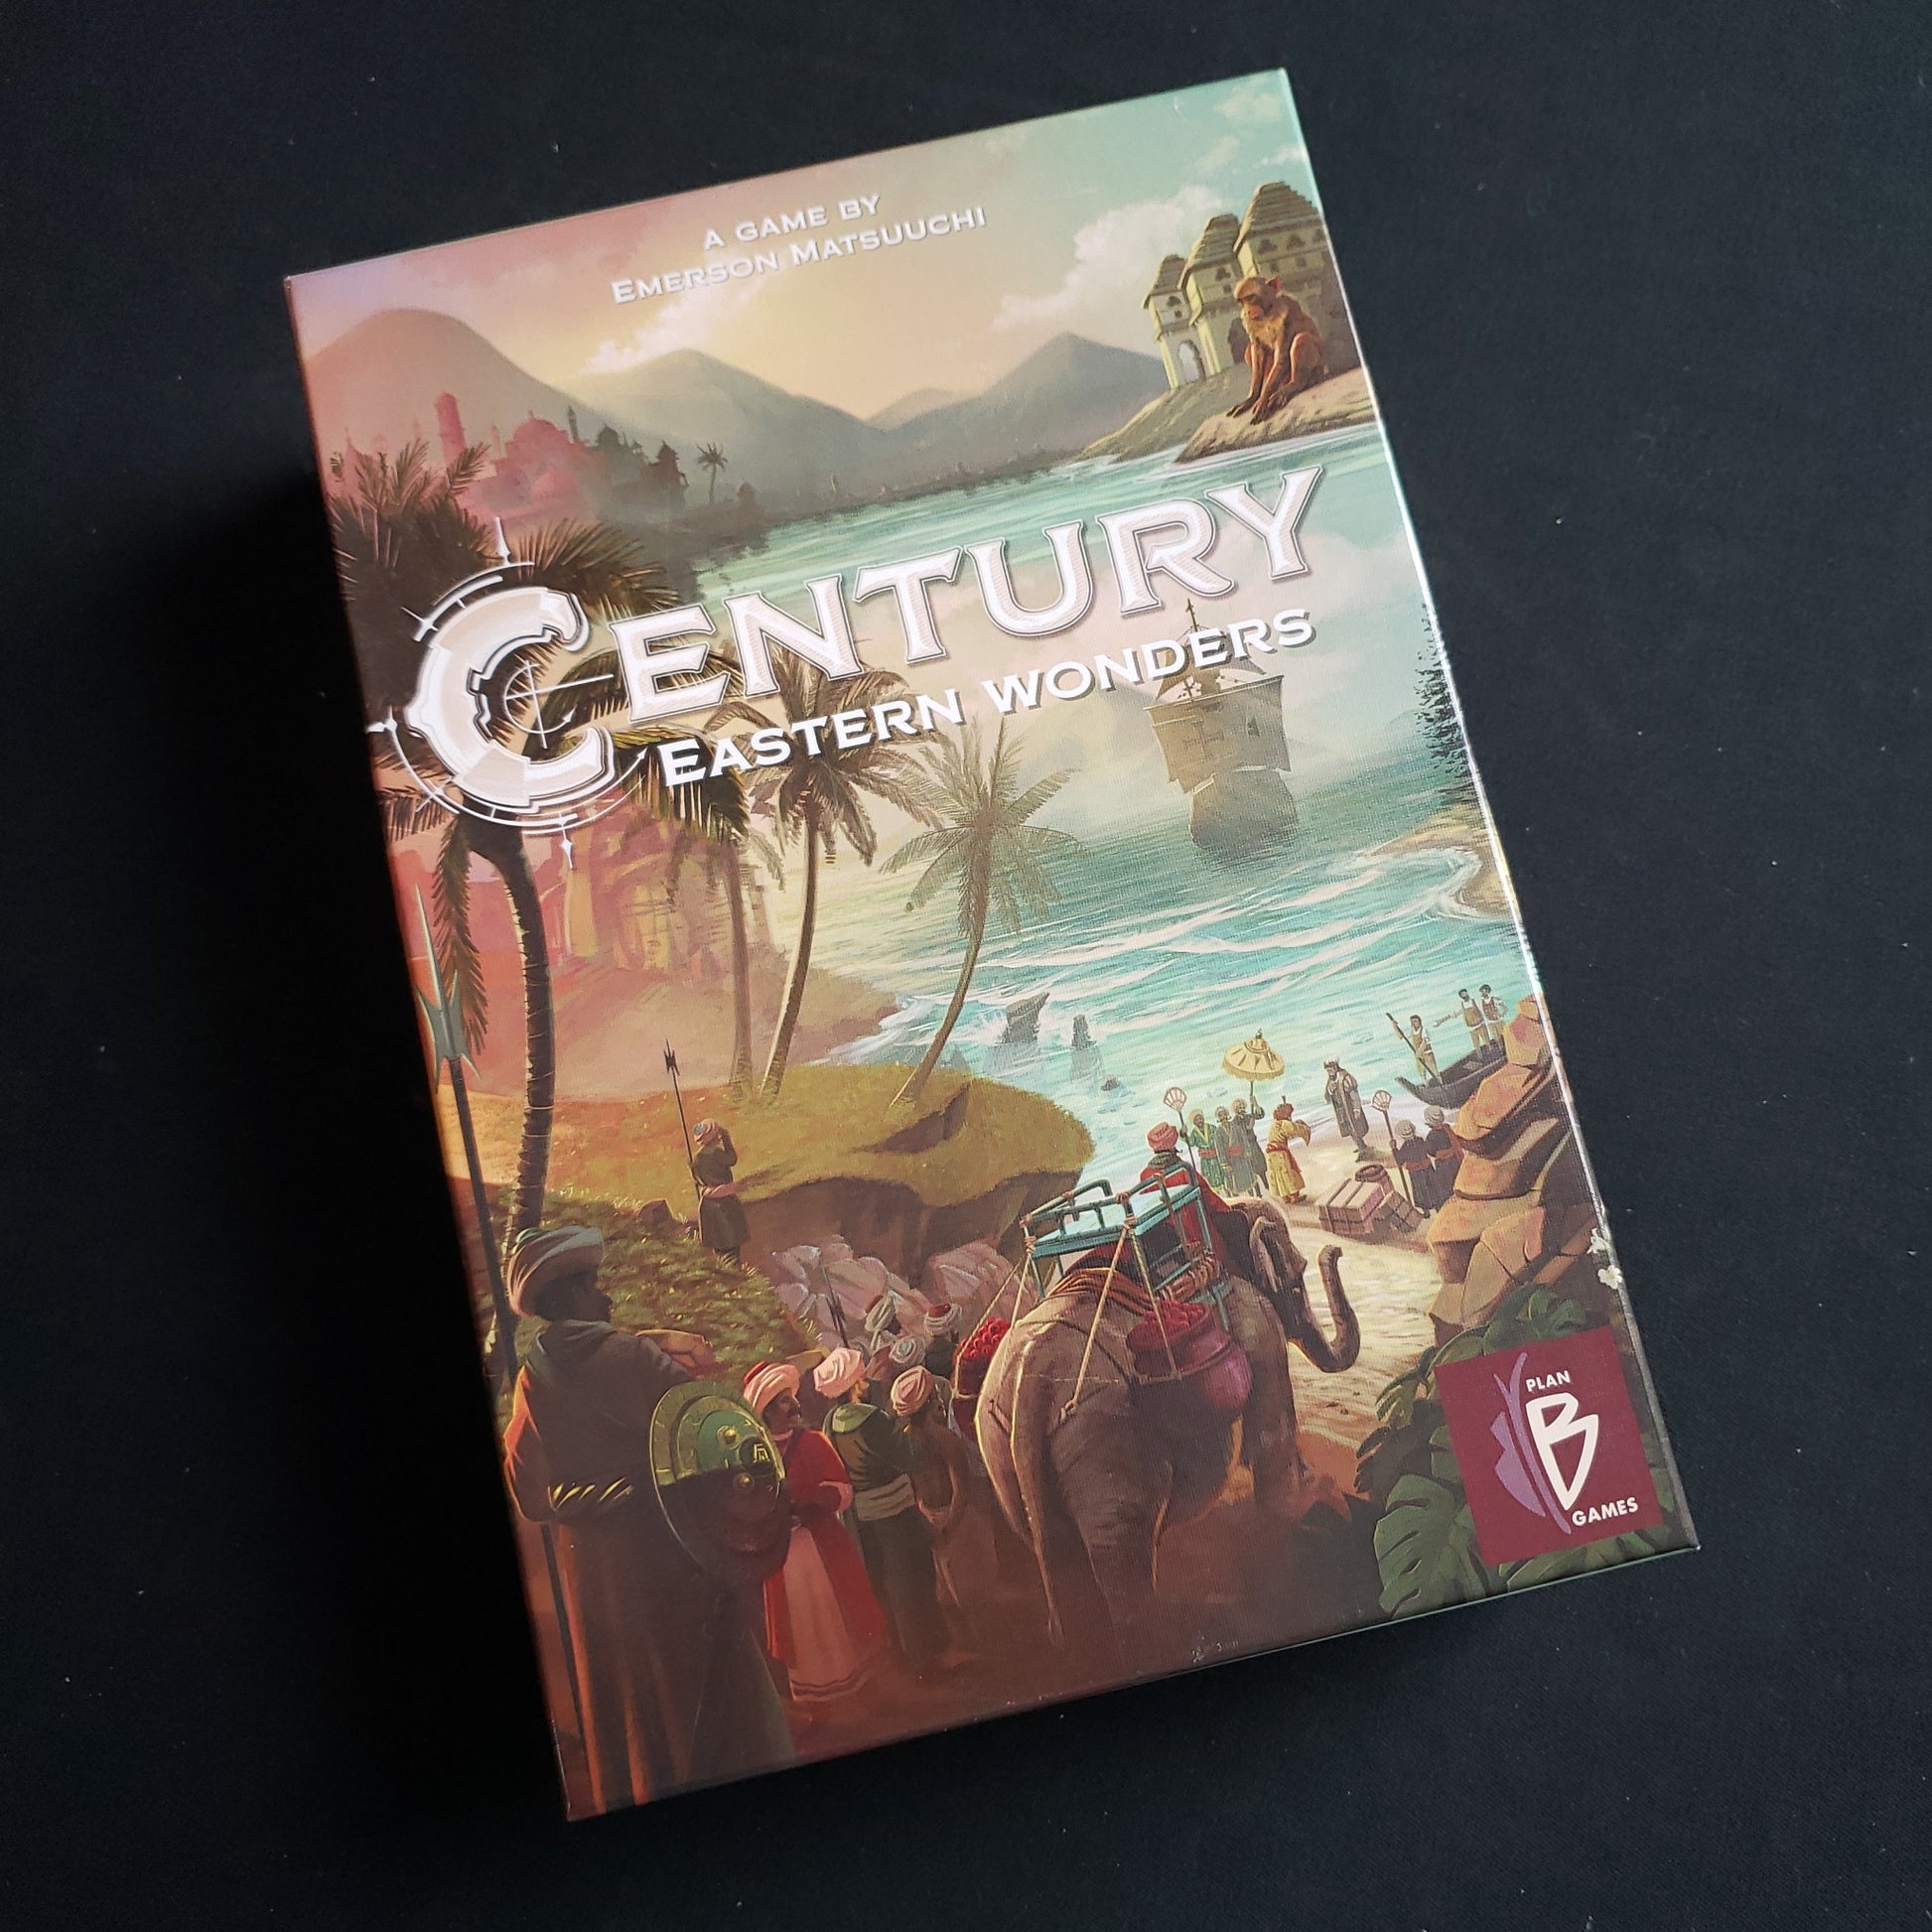 Image shows the front cover of the box of the Century: Eastern Wonders board game